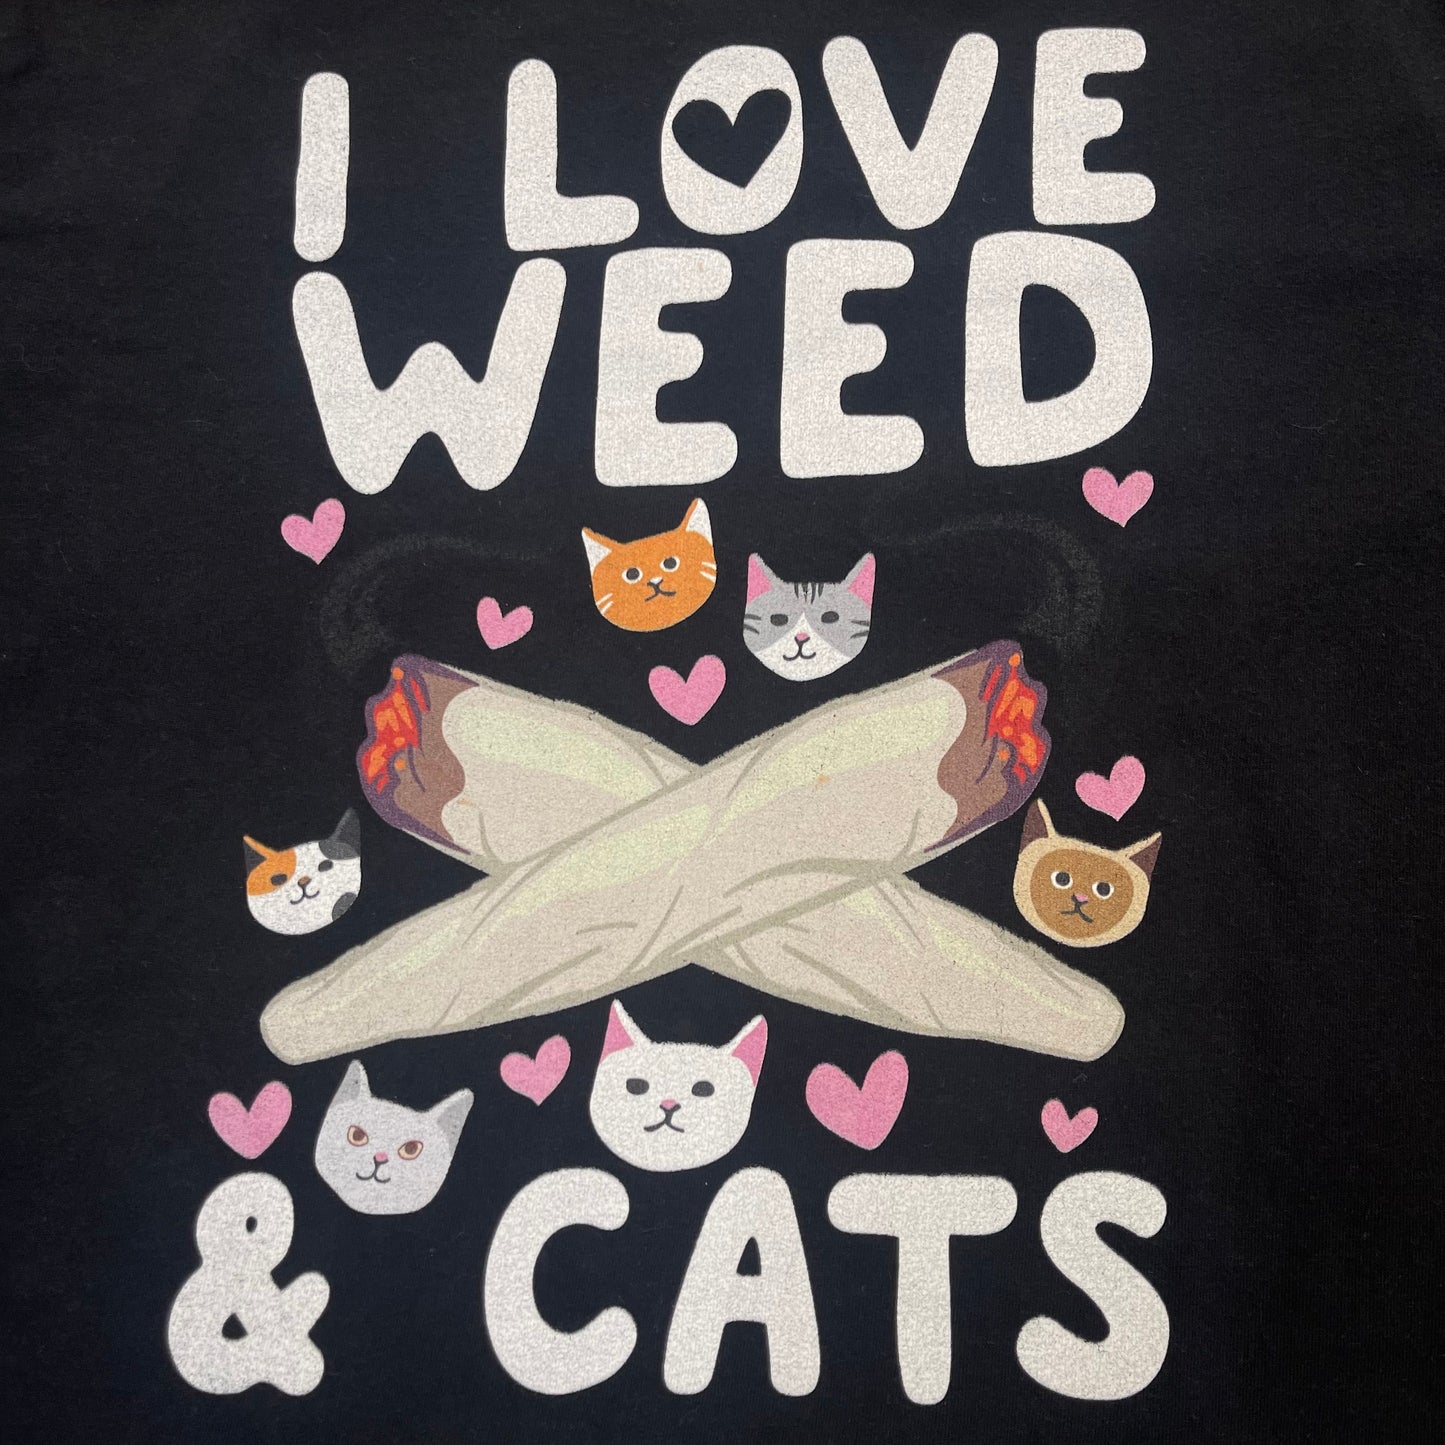 THRIFTED “I LOVE WEED & CATS” TEE